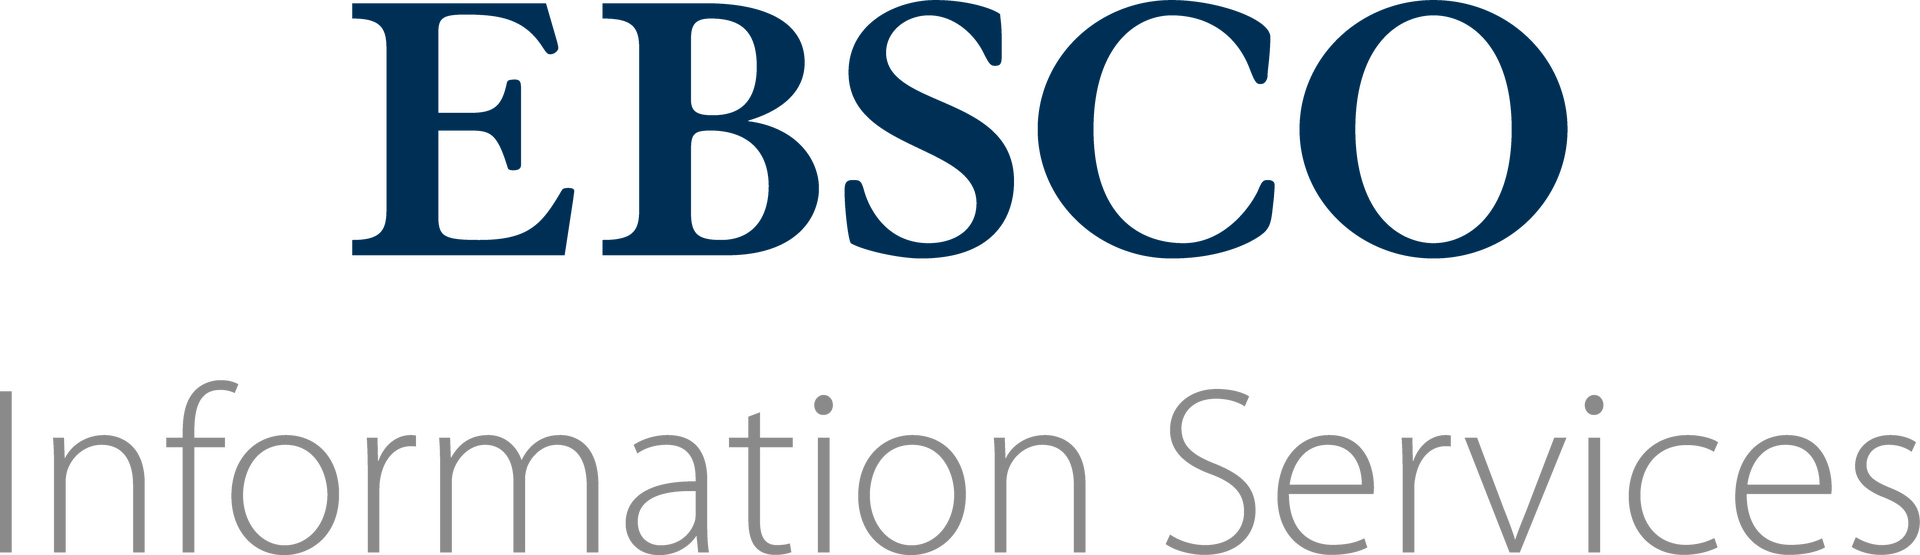 ebsco_information_services_logo_rgb_stacked.png